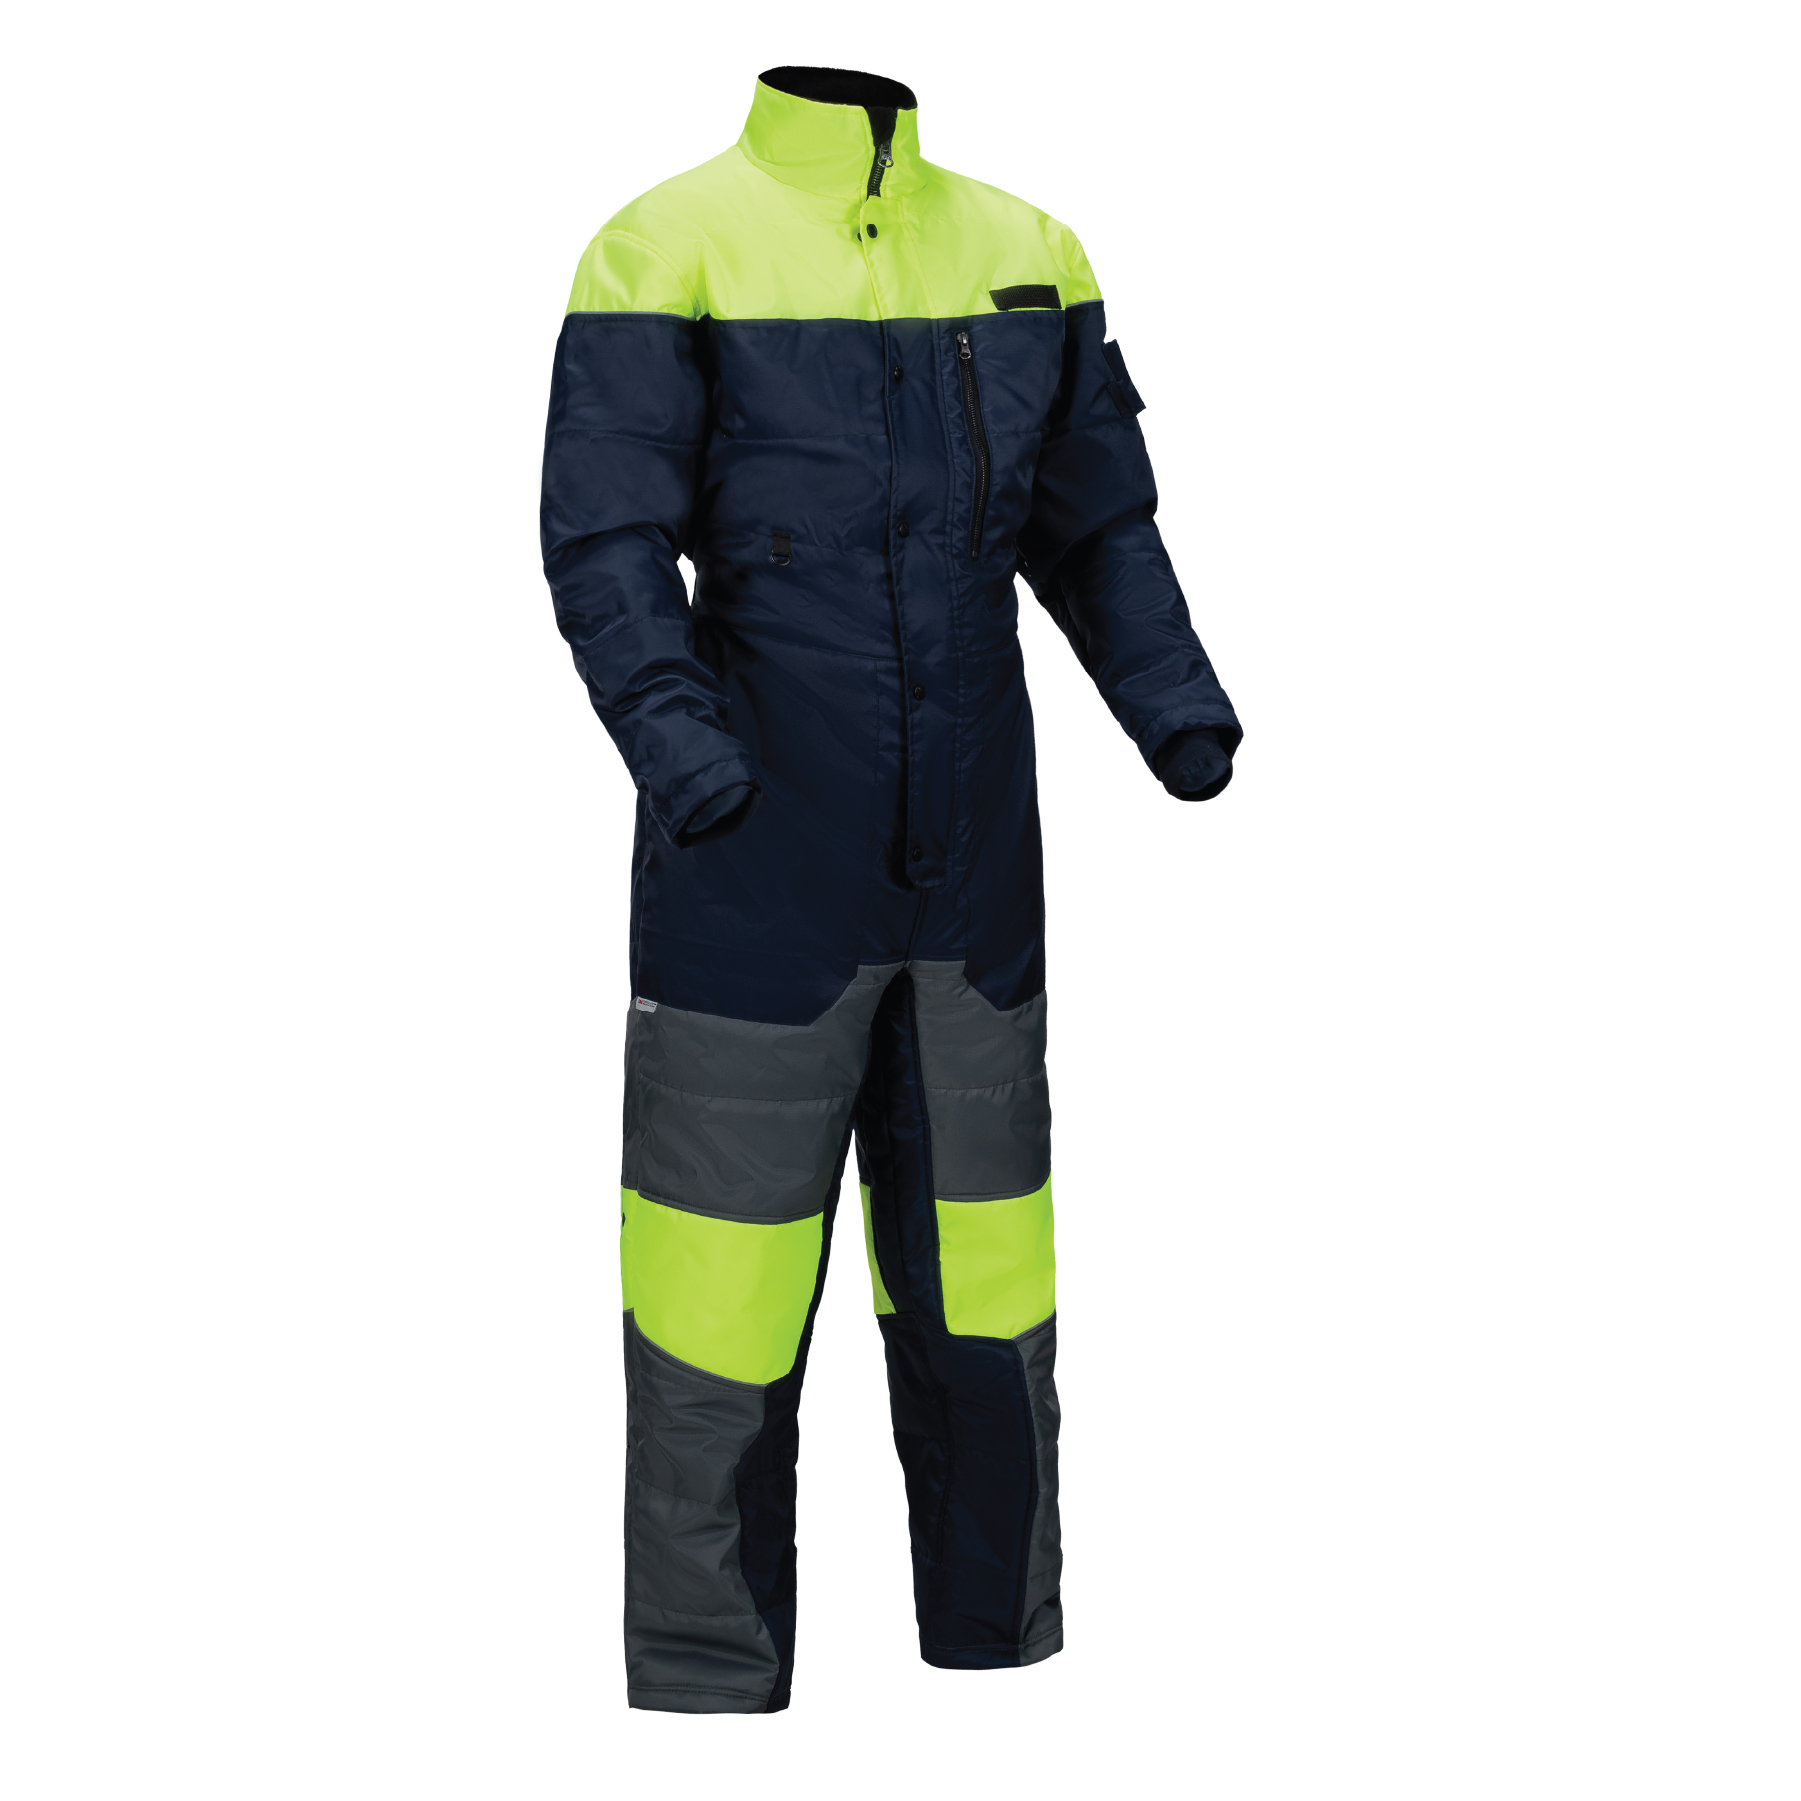 Insulated Freezer Coveralls